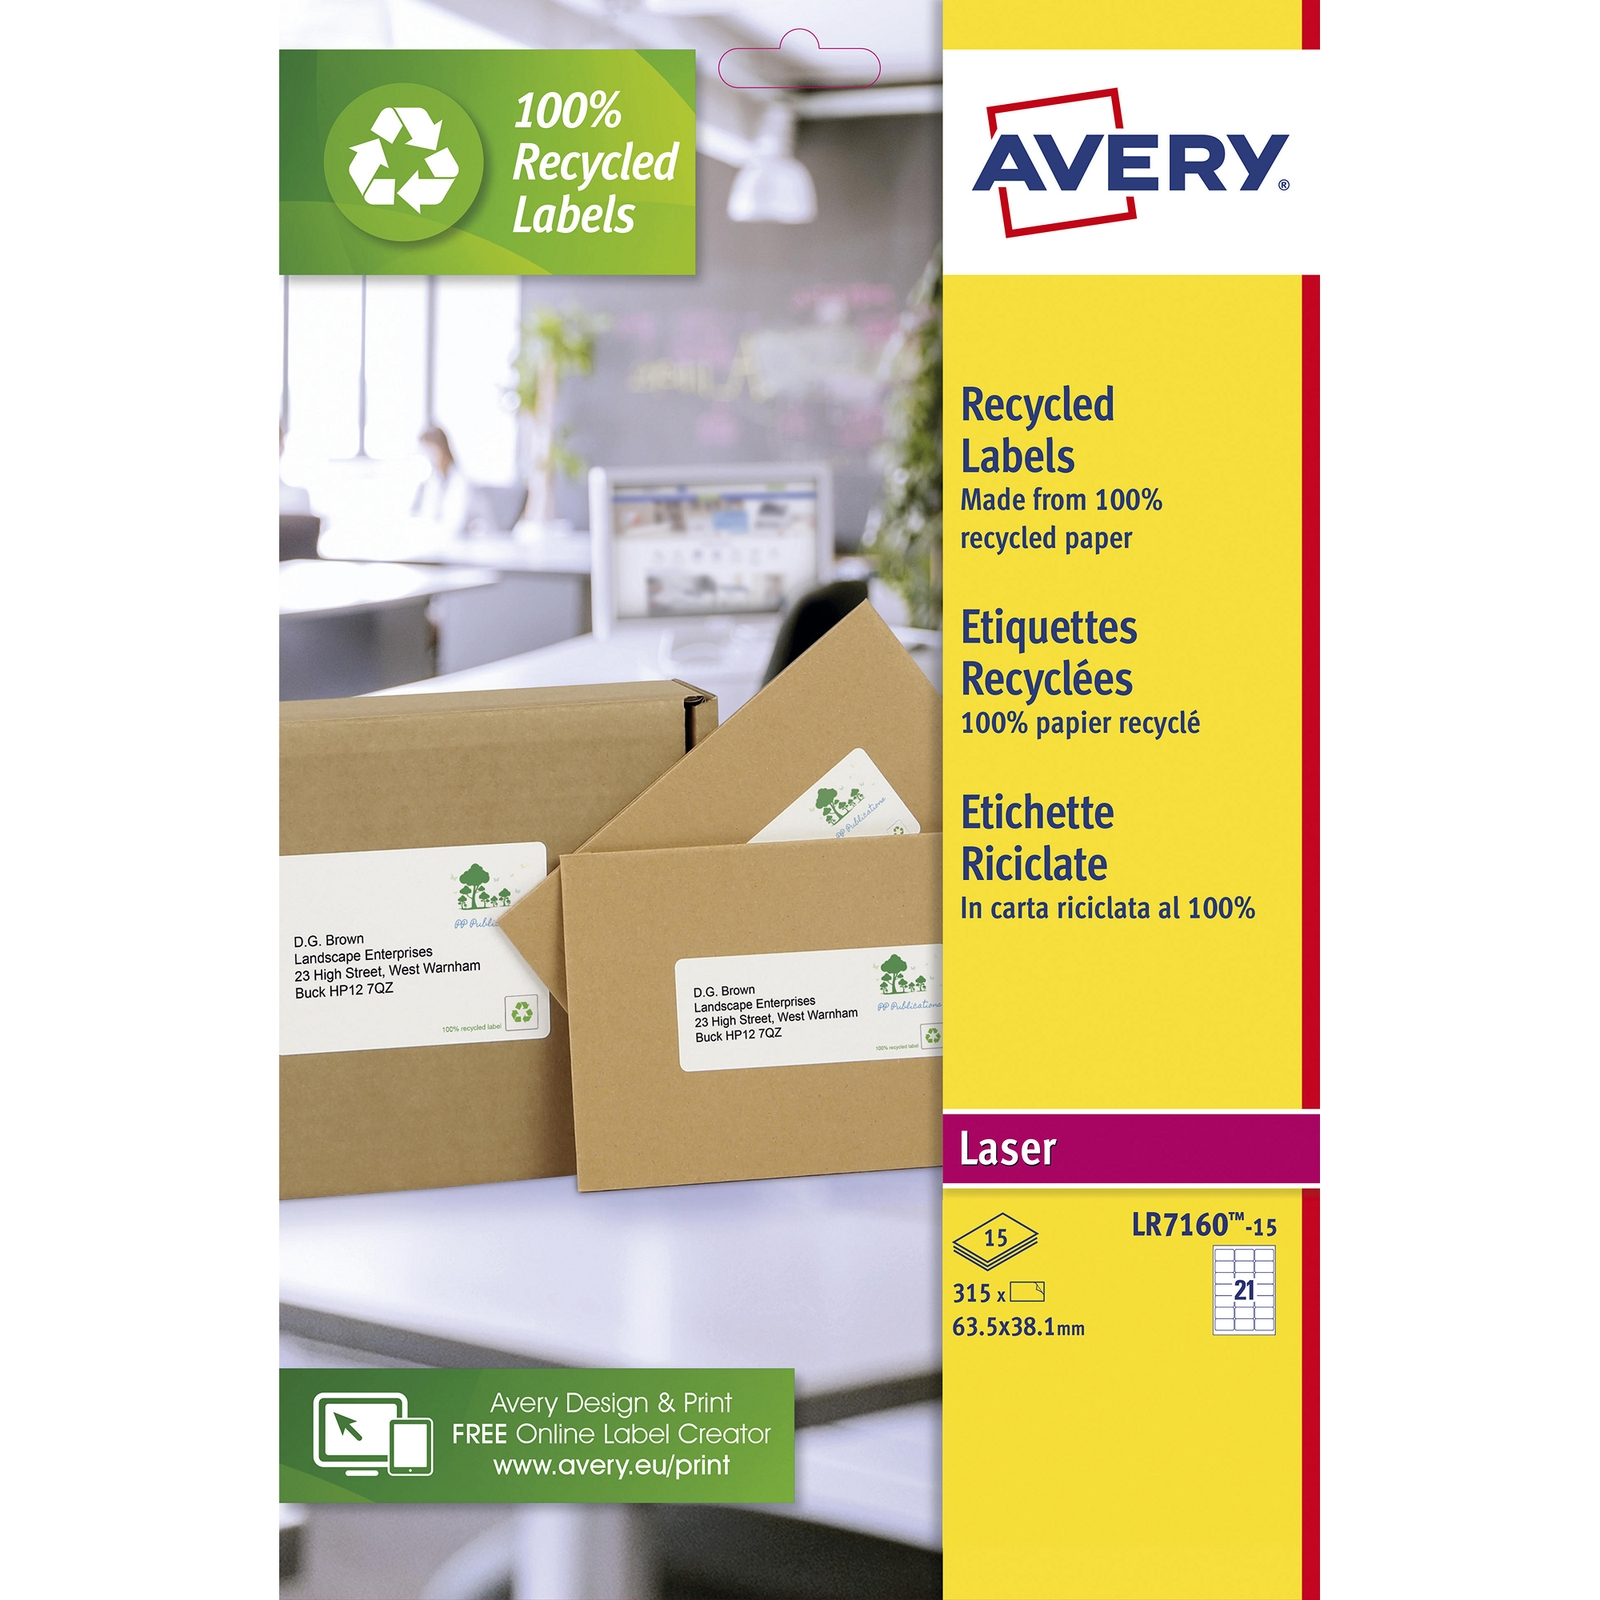 Recycled Avery Quick Peel Labels - 21 Labels, 63.5 x 38.1mm